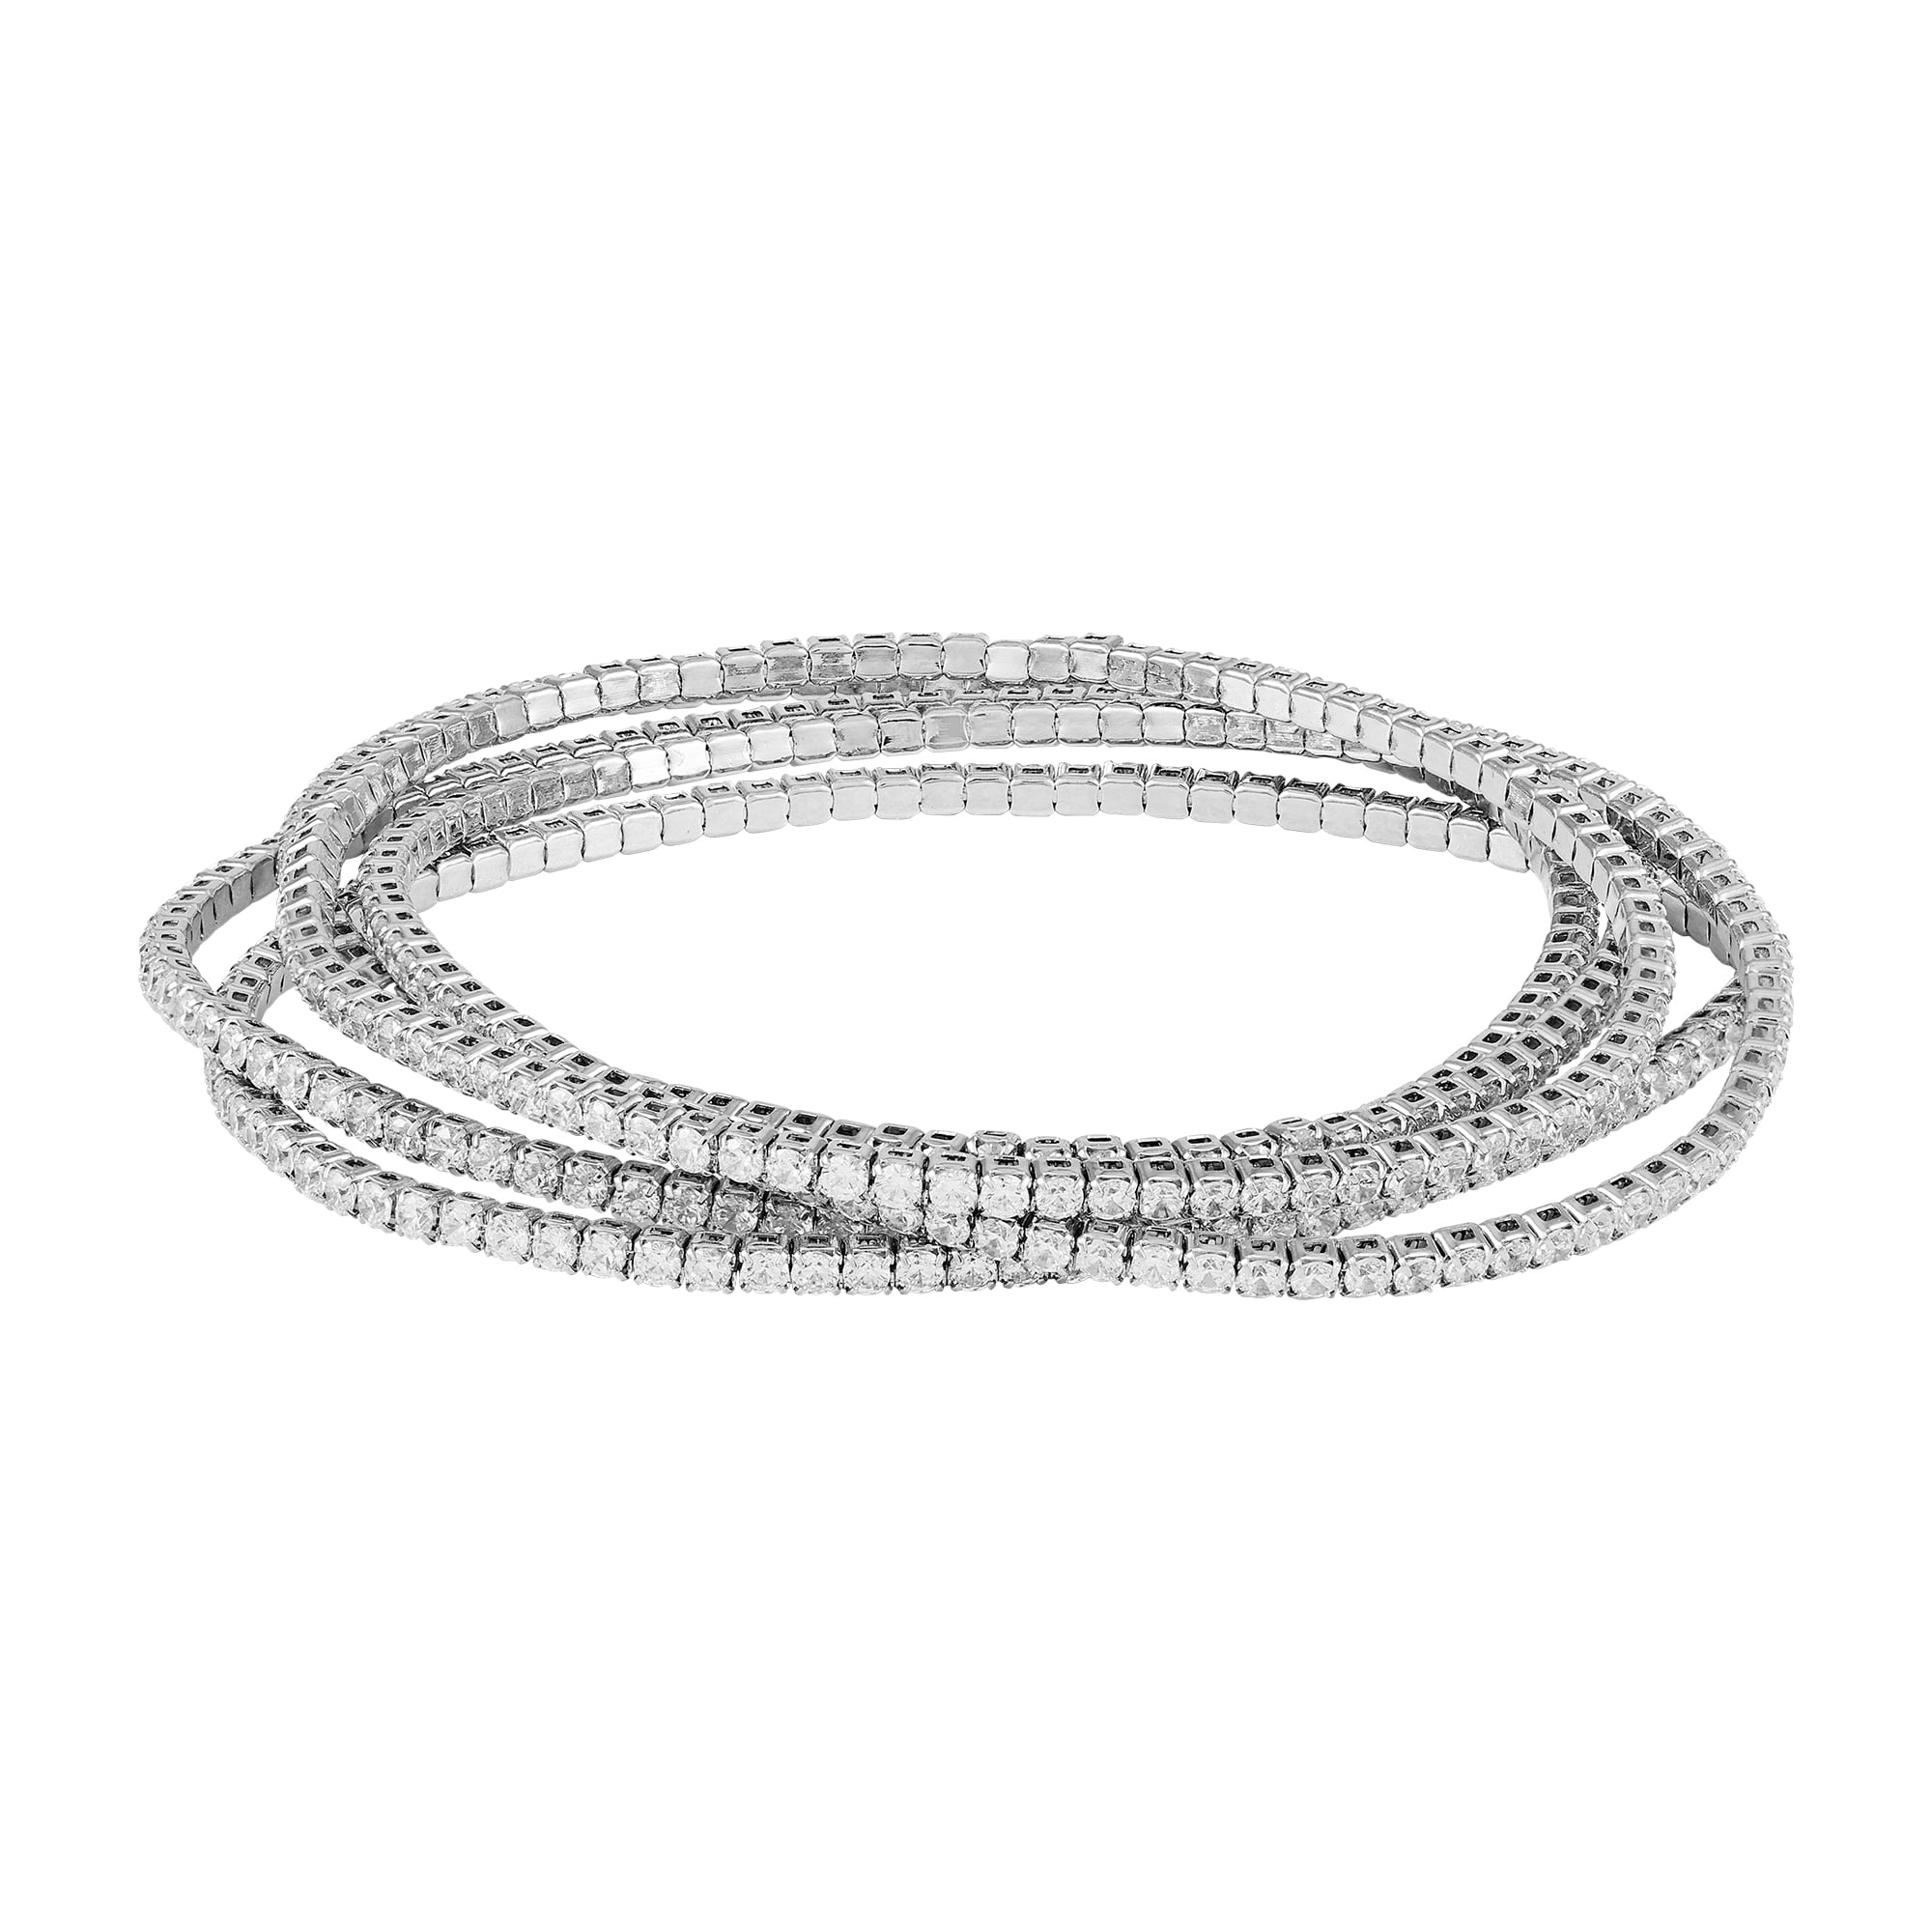 Buy Silver Stainless Steel 6mm Black and White Reflective Nylon Cord  Bracelet Online - Inox Jewelry India